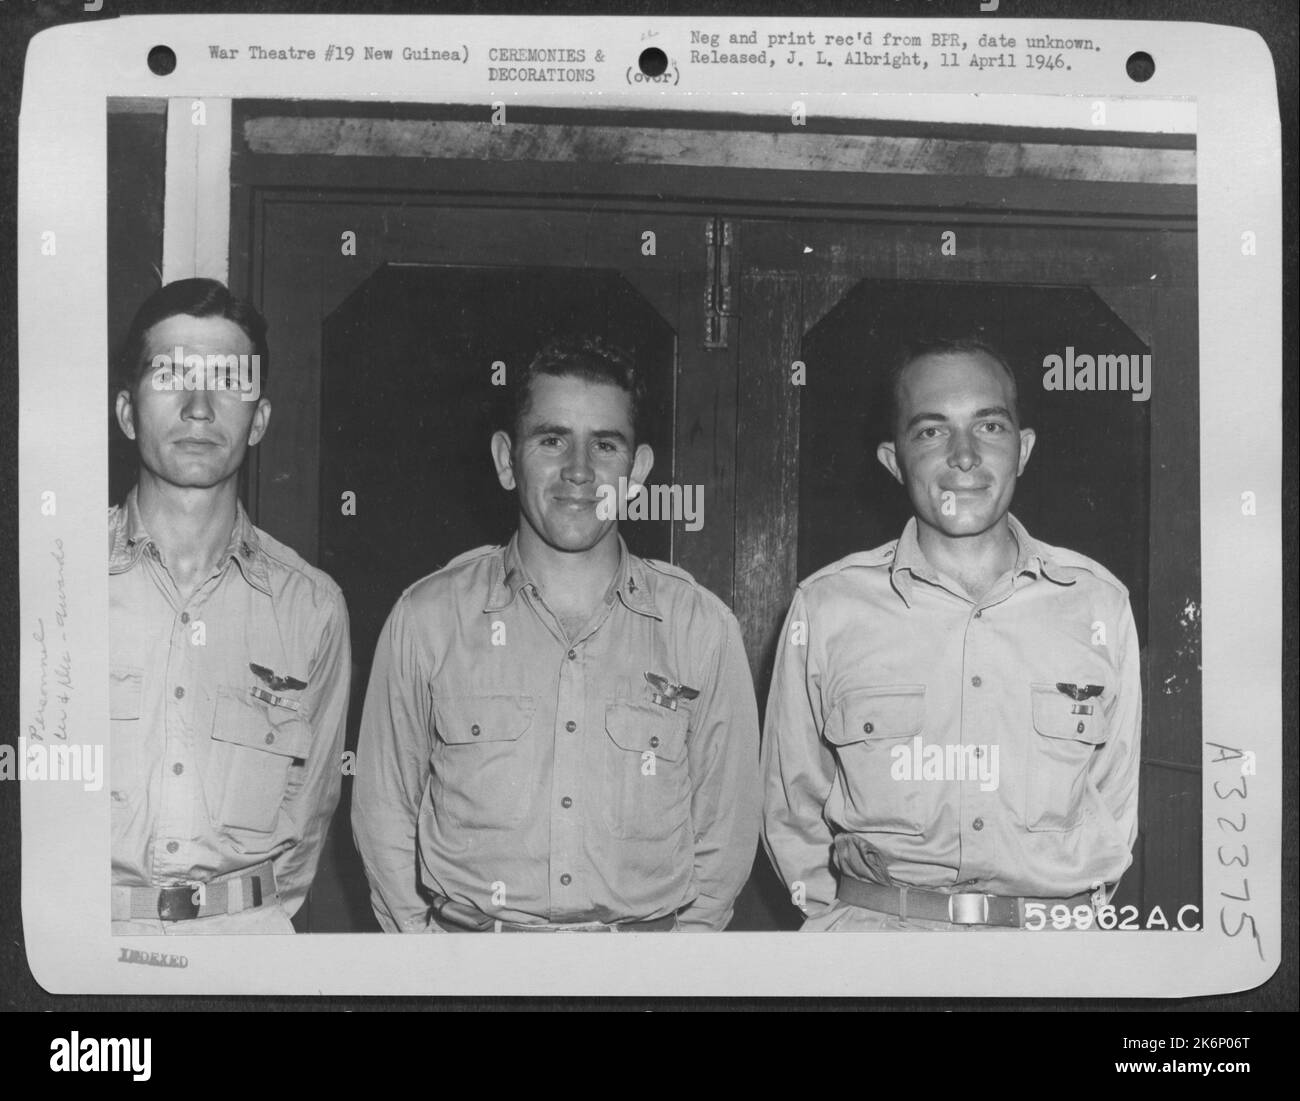 The Air Medal was awarded these pursuit pilots at ceremonies in New Guinea, for participating in 25 or more combat missions where enemy action was probable and expected. Shown (left to right) are: 2nd Lt. Roy A. Owen, of Greenwood, S.C.; 2nd Lt. Stock Photo